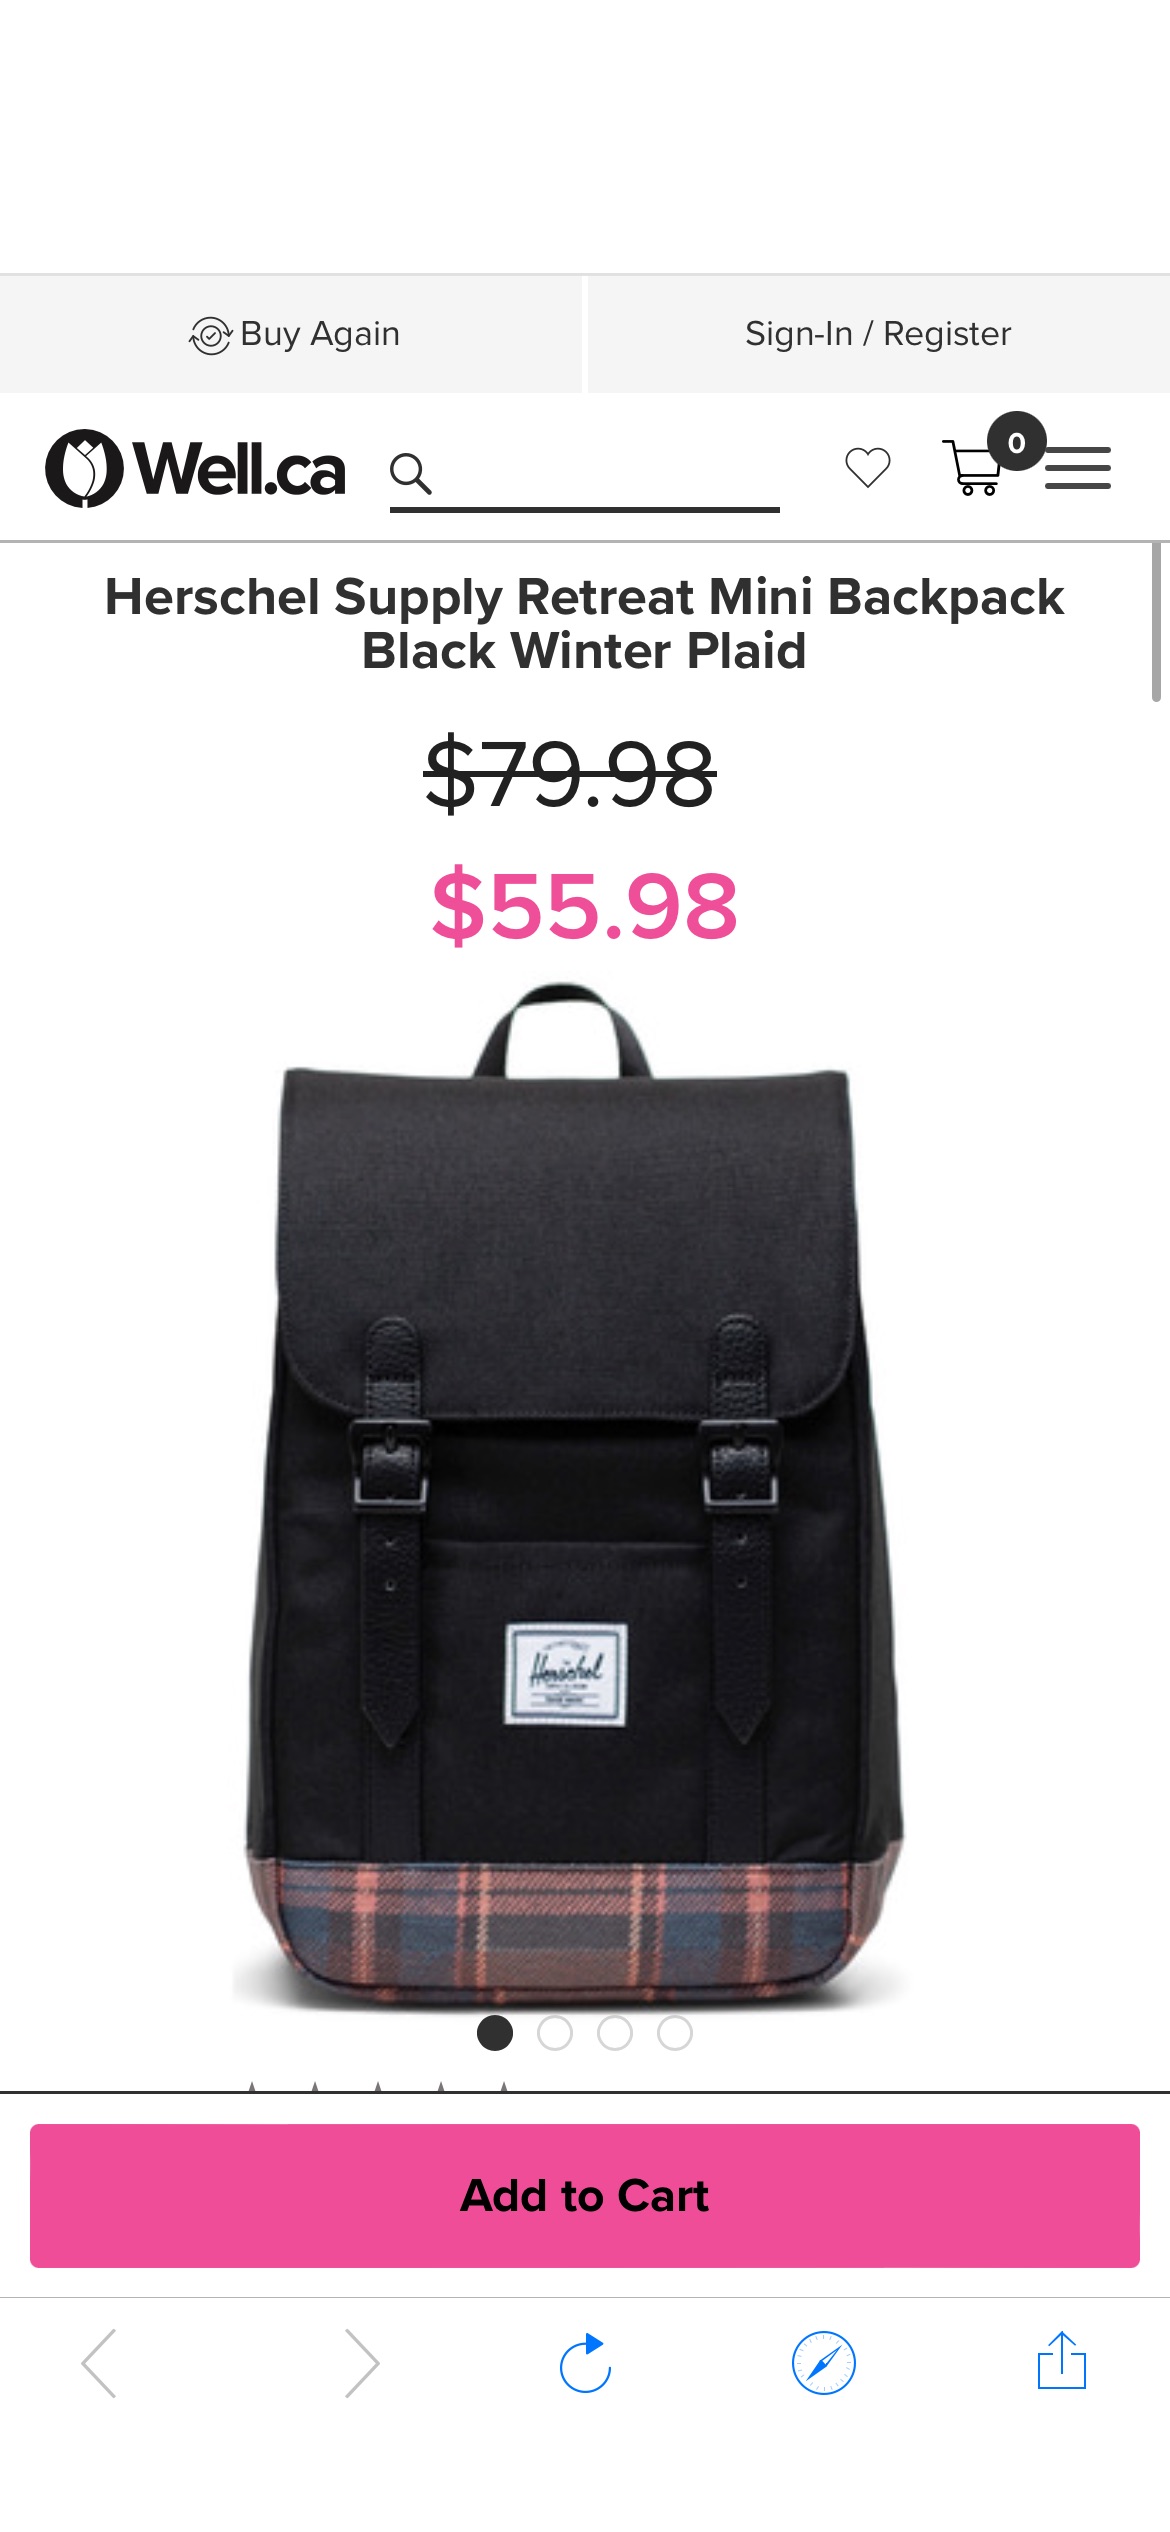 Buy Herschel Supply Retreat Mini Backpack Black Winter Plaid at Well.ca | Free Shipping $35+ in Canada